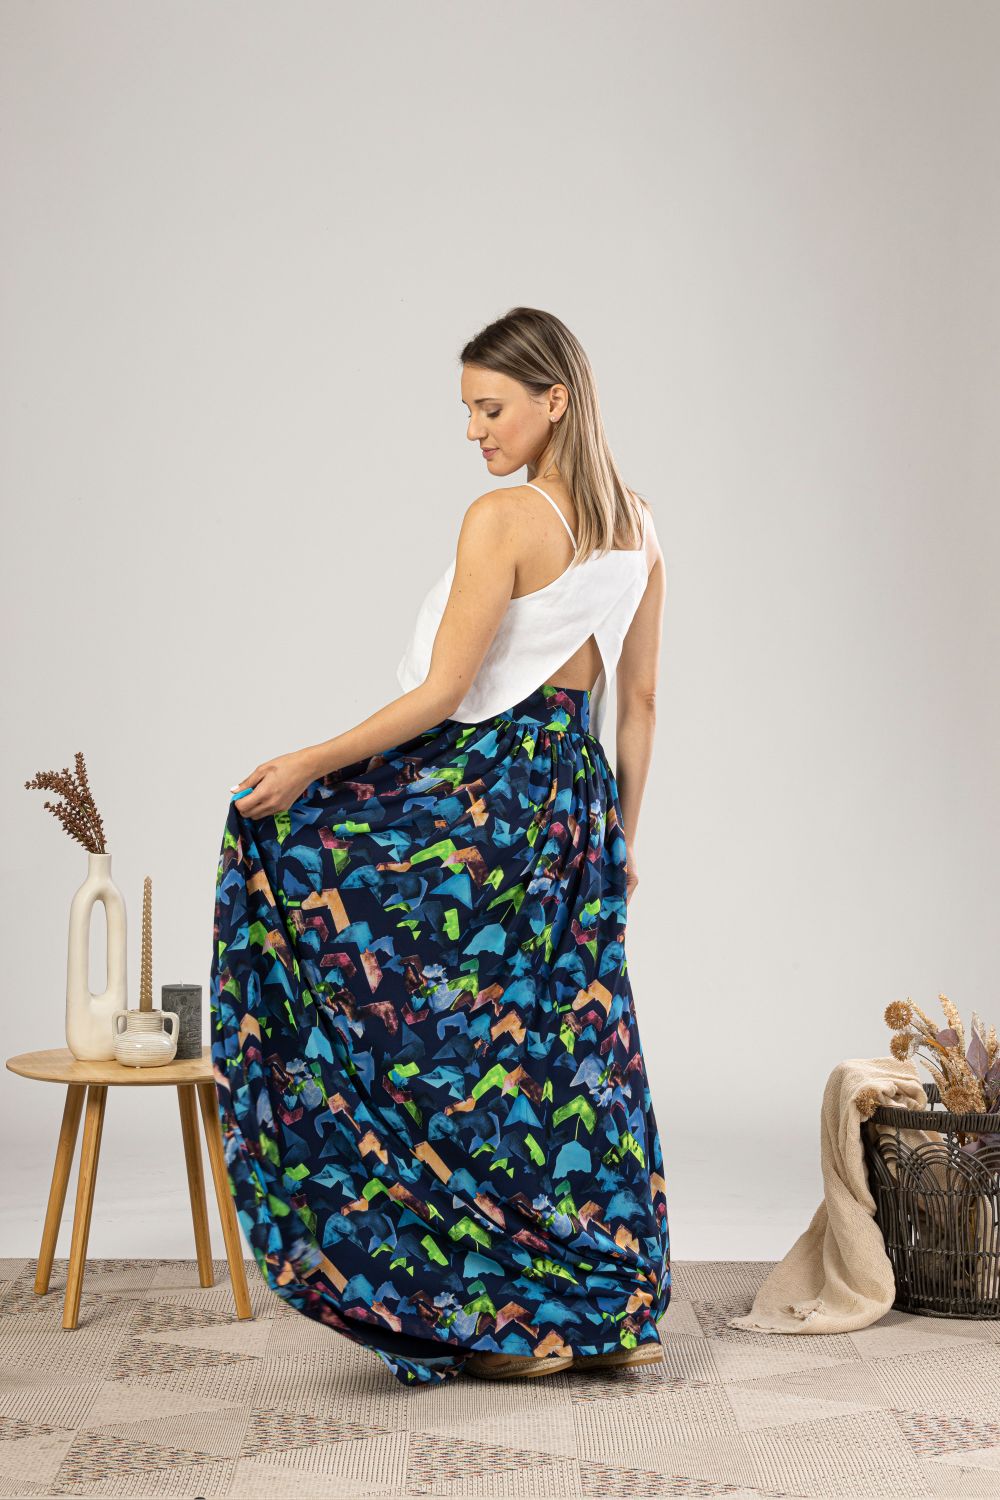 Extravagant Colorful Chiffon Skirt ideal for summer days - from NikkaPlace | Effortless fashion for easy living